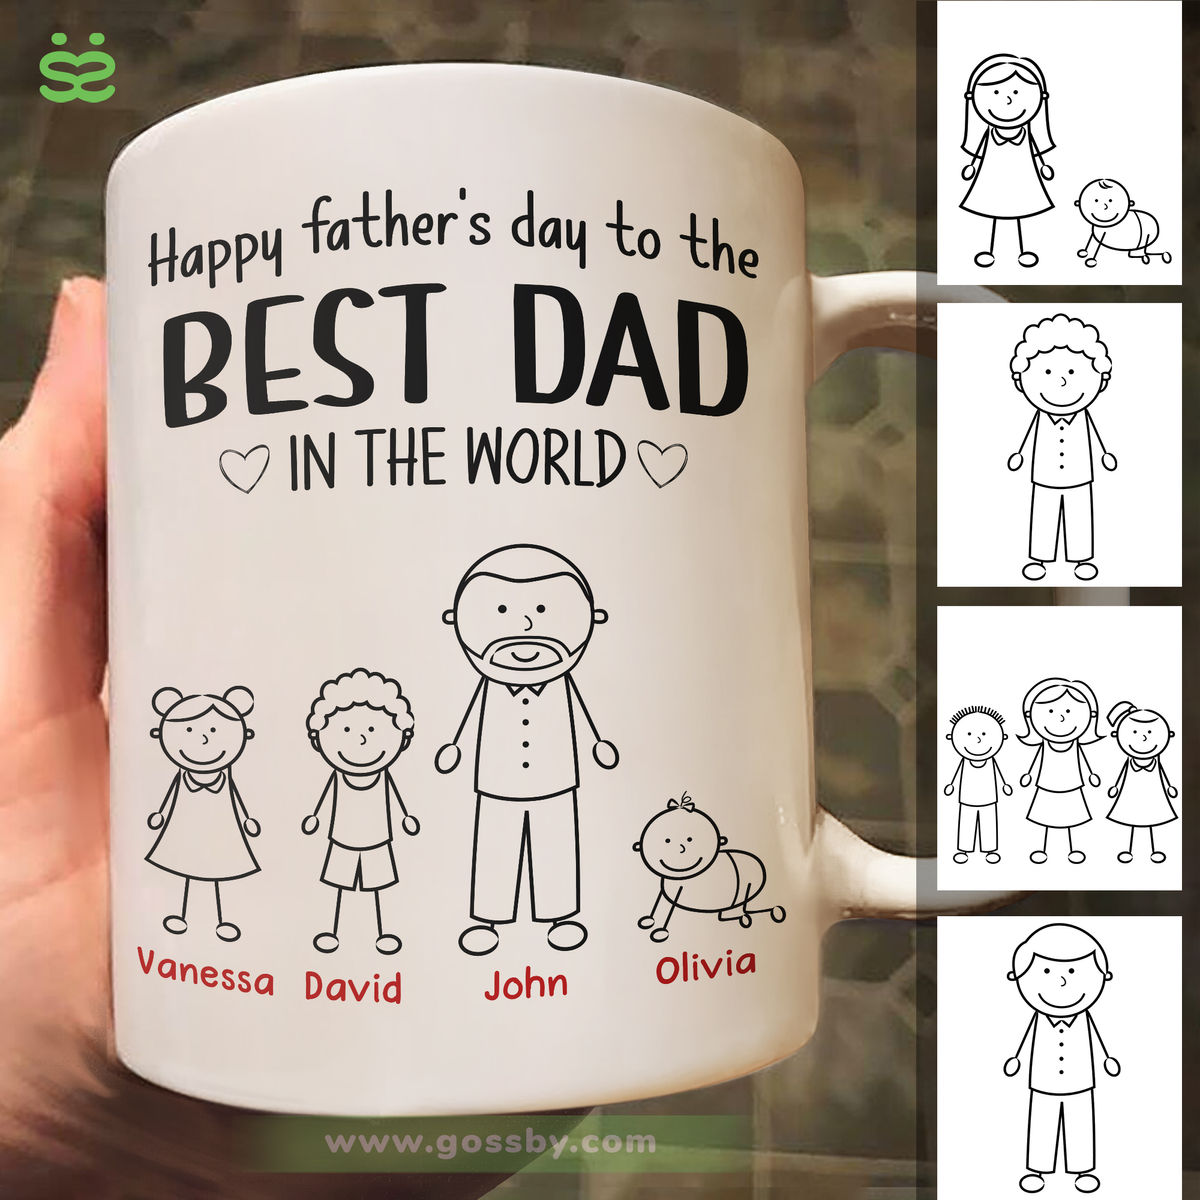 Personalized Mug - Father's Day - Happy father's day to the best dad in the world